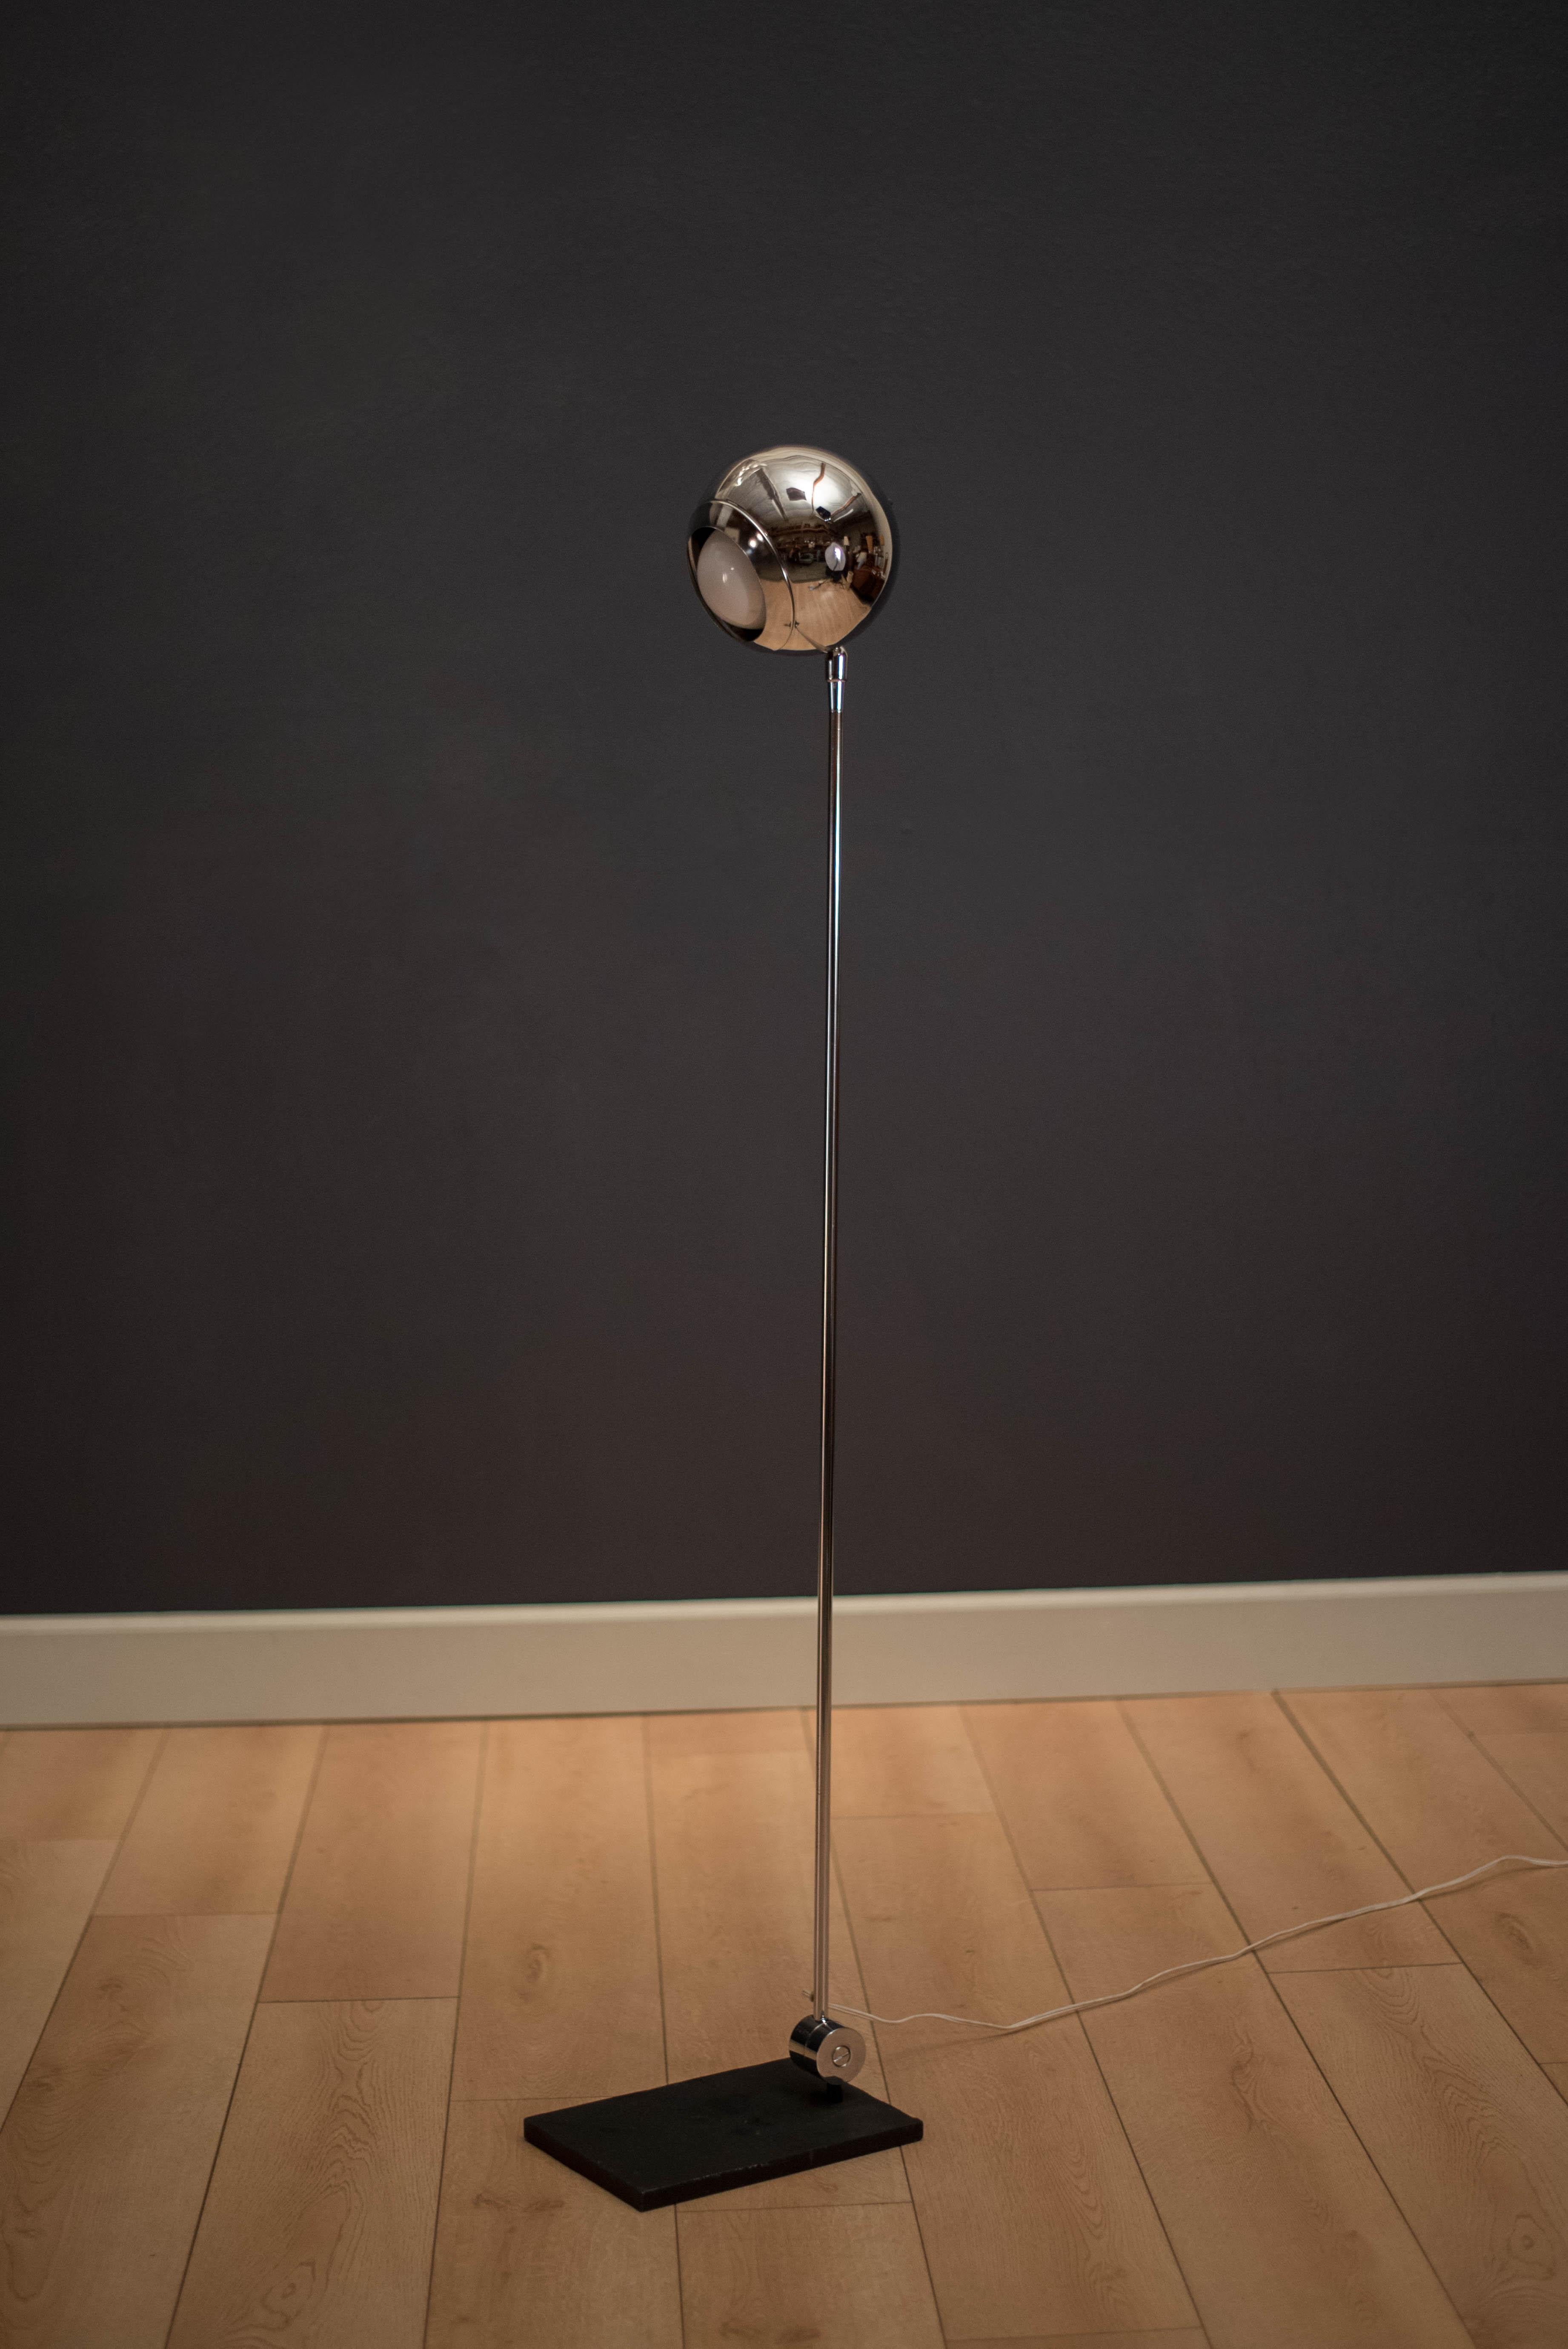 Mid-Century Modern floor lamp designed by Robert Sonneman in polished chrome. This piece can be adjusted from the base and head tilts up and down.
 